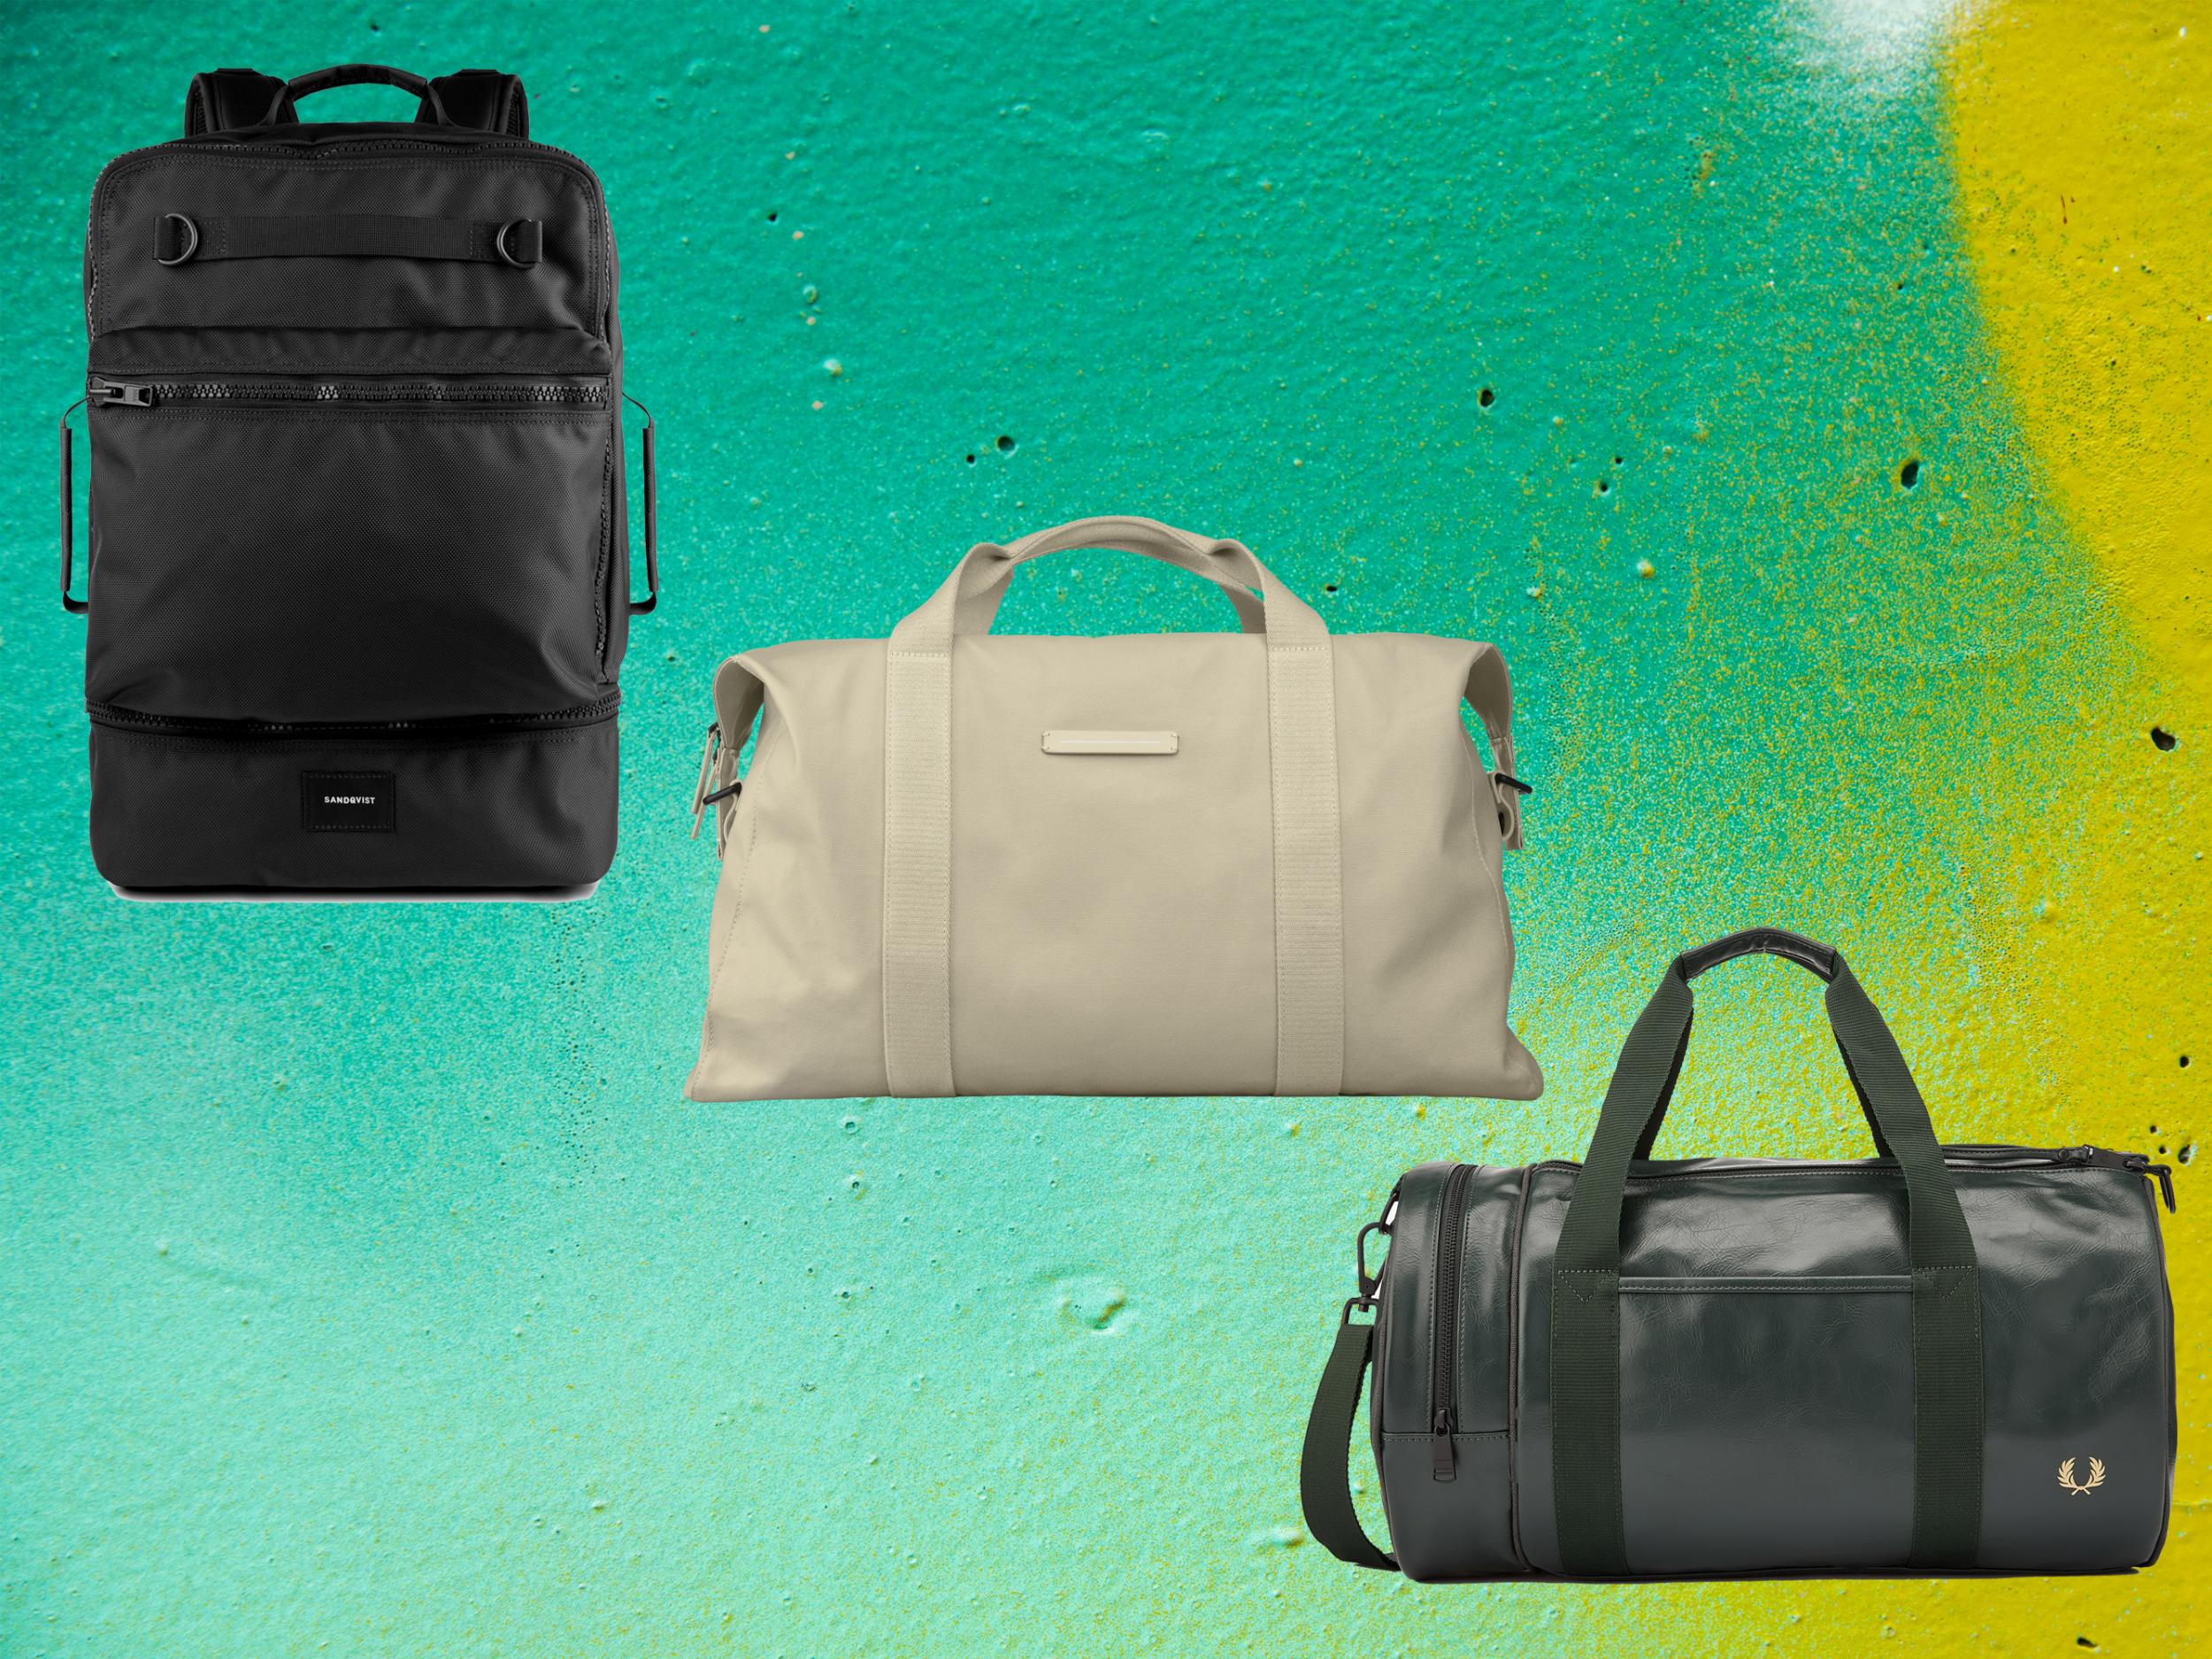 Best men’s overnight travel bags you need for work or weekend trips ...